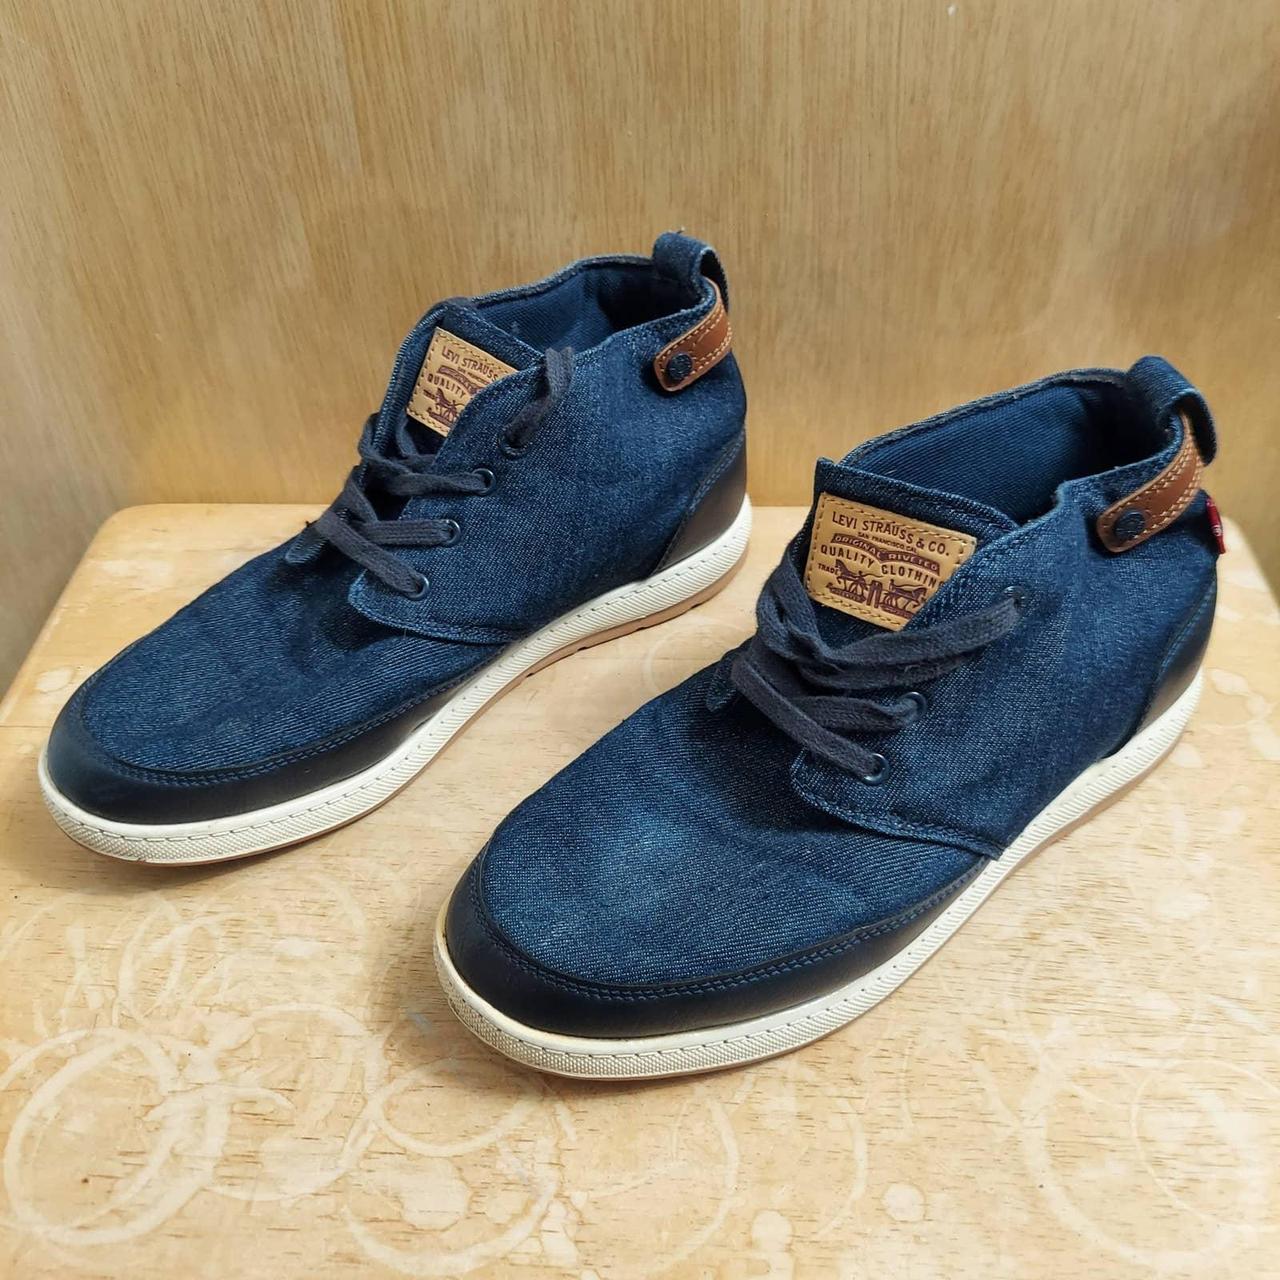 New Balance x Levi's Collab 327 Trainers Running Shoes | Fashion Forward  Forecast | Curated Fashion Week Runway Shows & Season Collections |  Trendsetting Styles by Designer Brands | Denim Jeans Observer